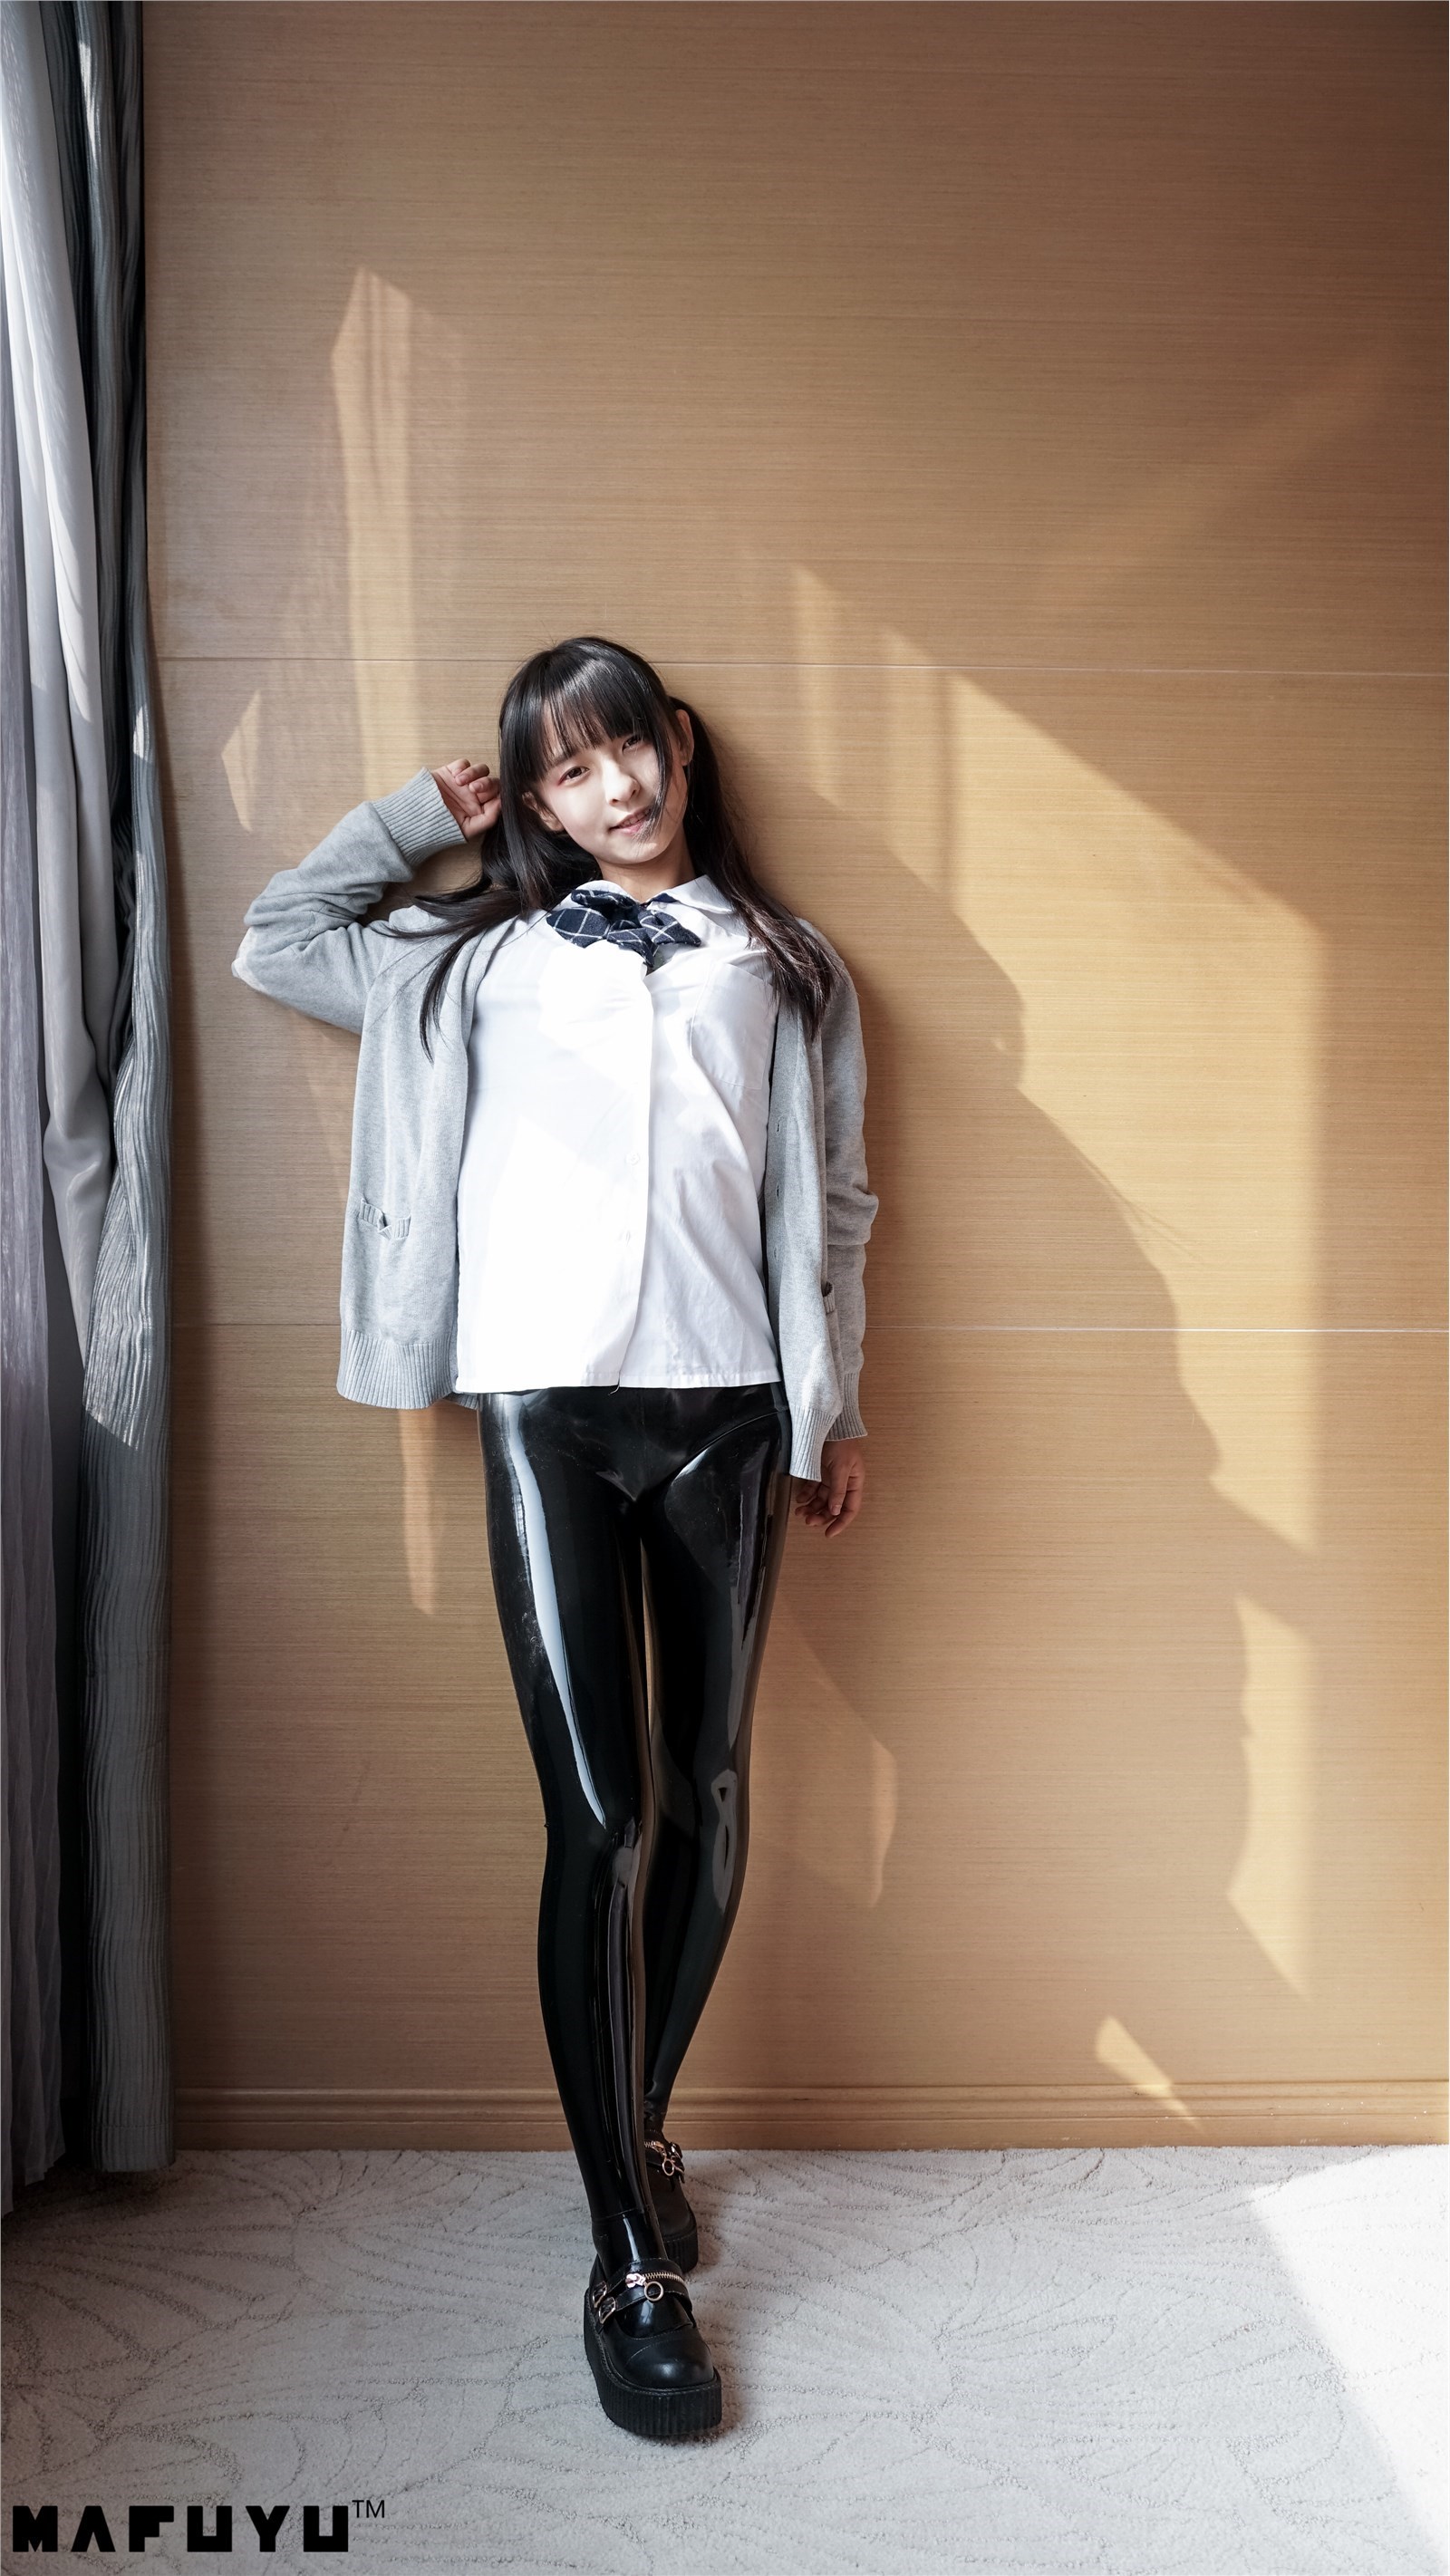 Shenle ban Zhendong Tubao 01 BLACK leather pants series pictures(126)